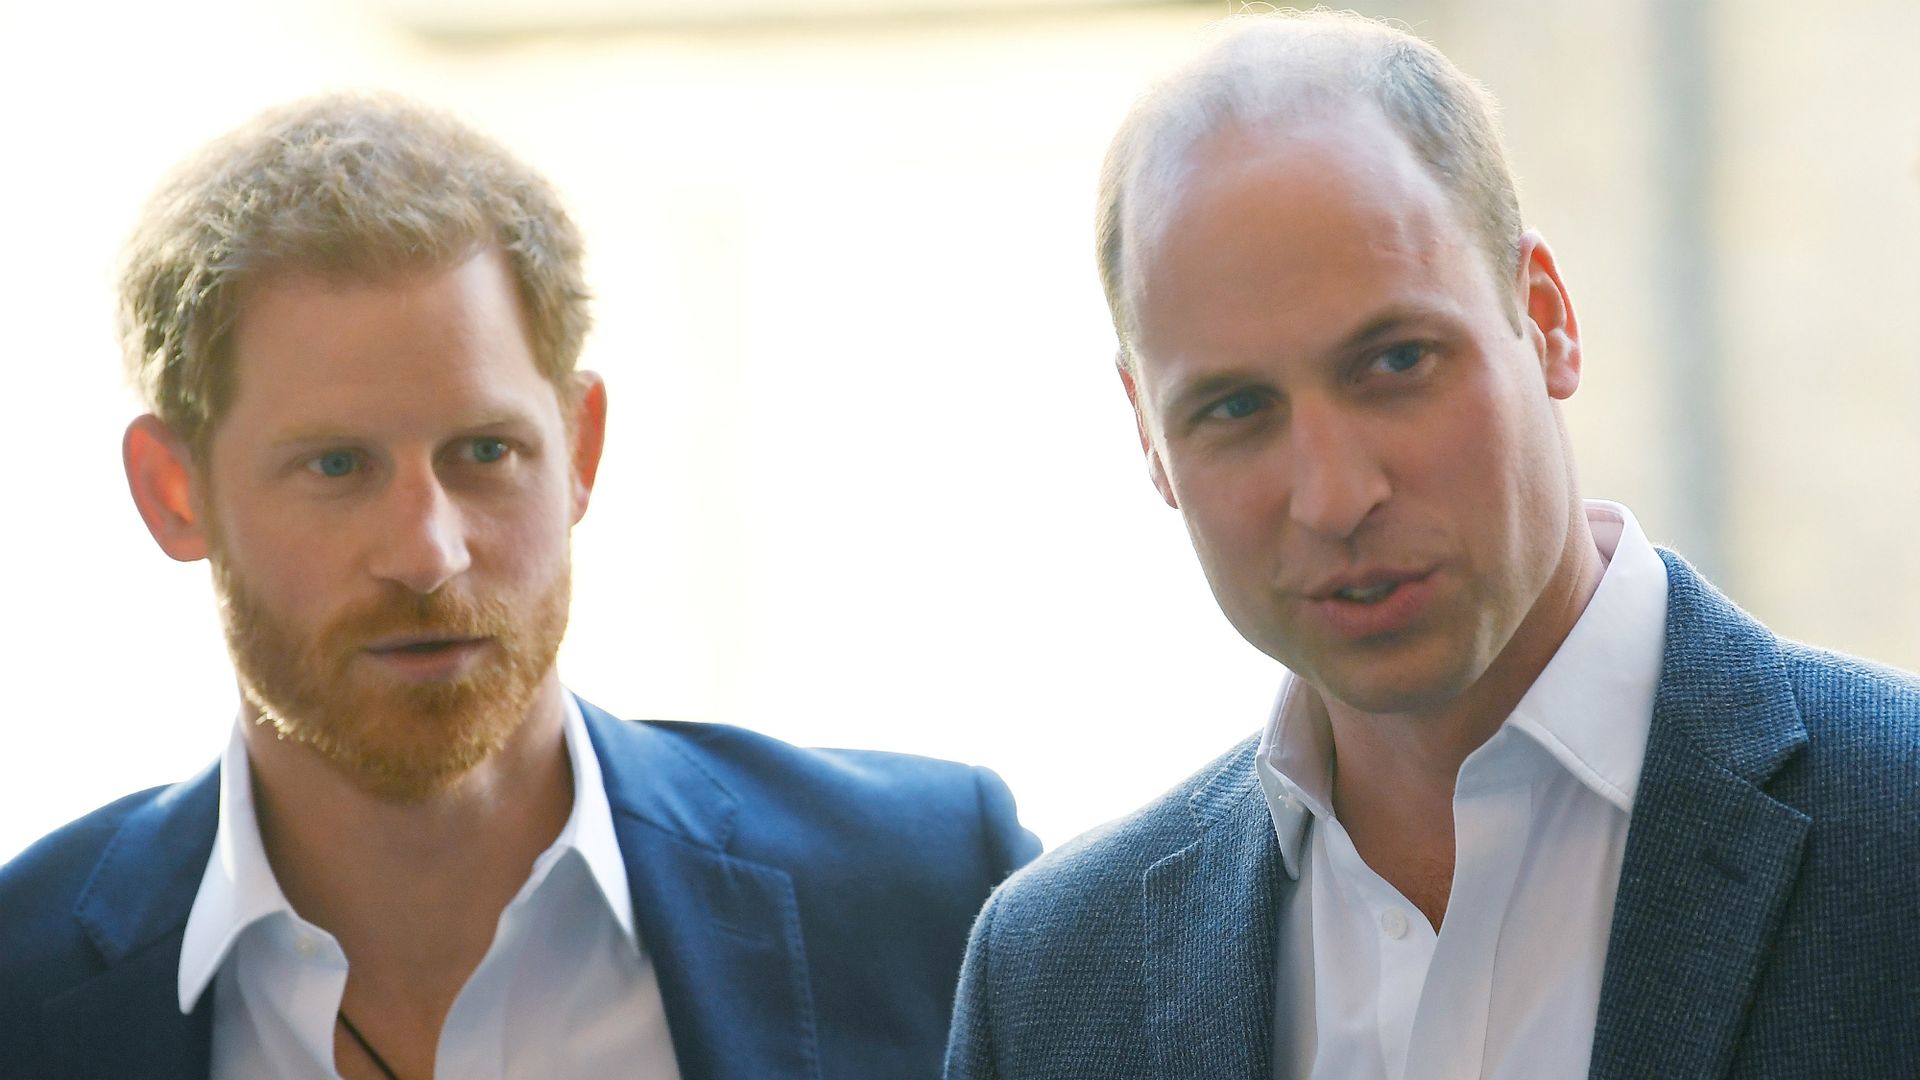 This New Detail From Prince William And Prince Harry’s Feud Is ...